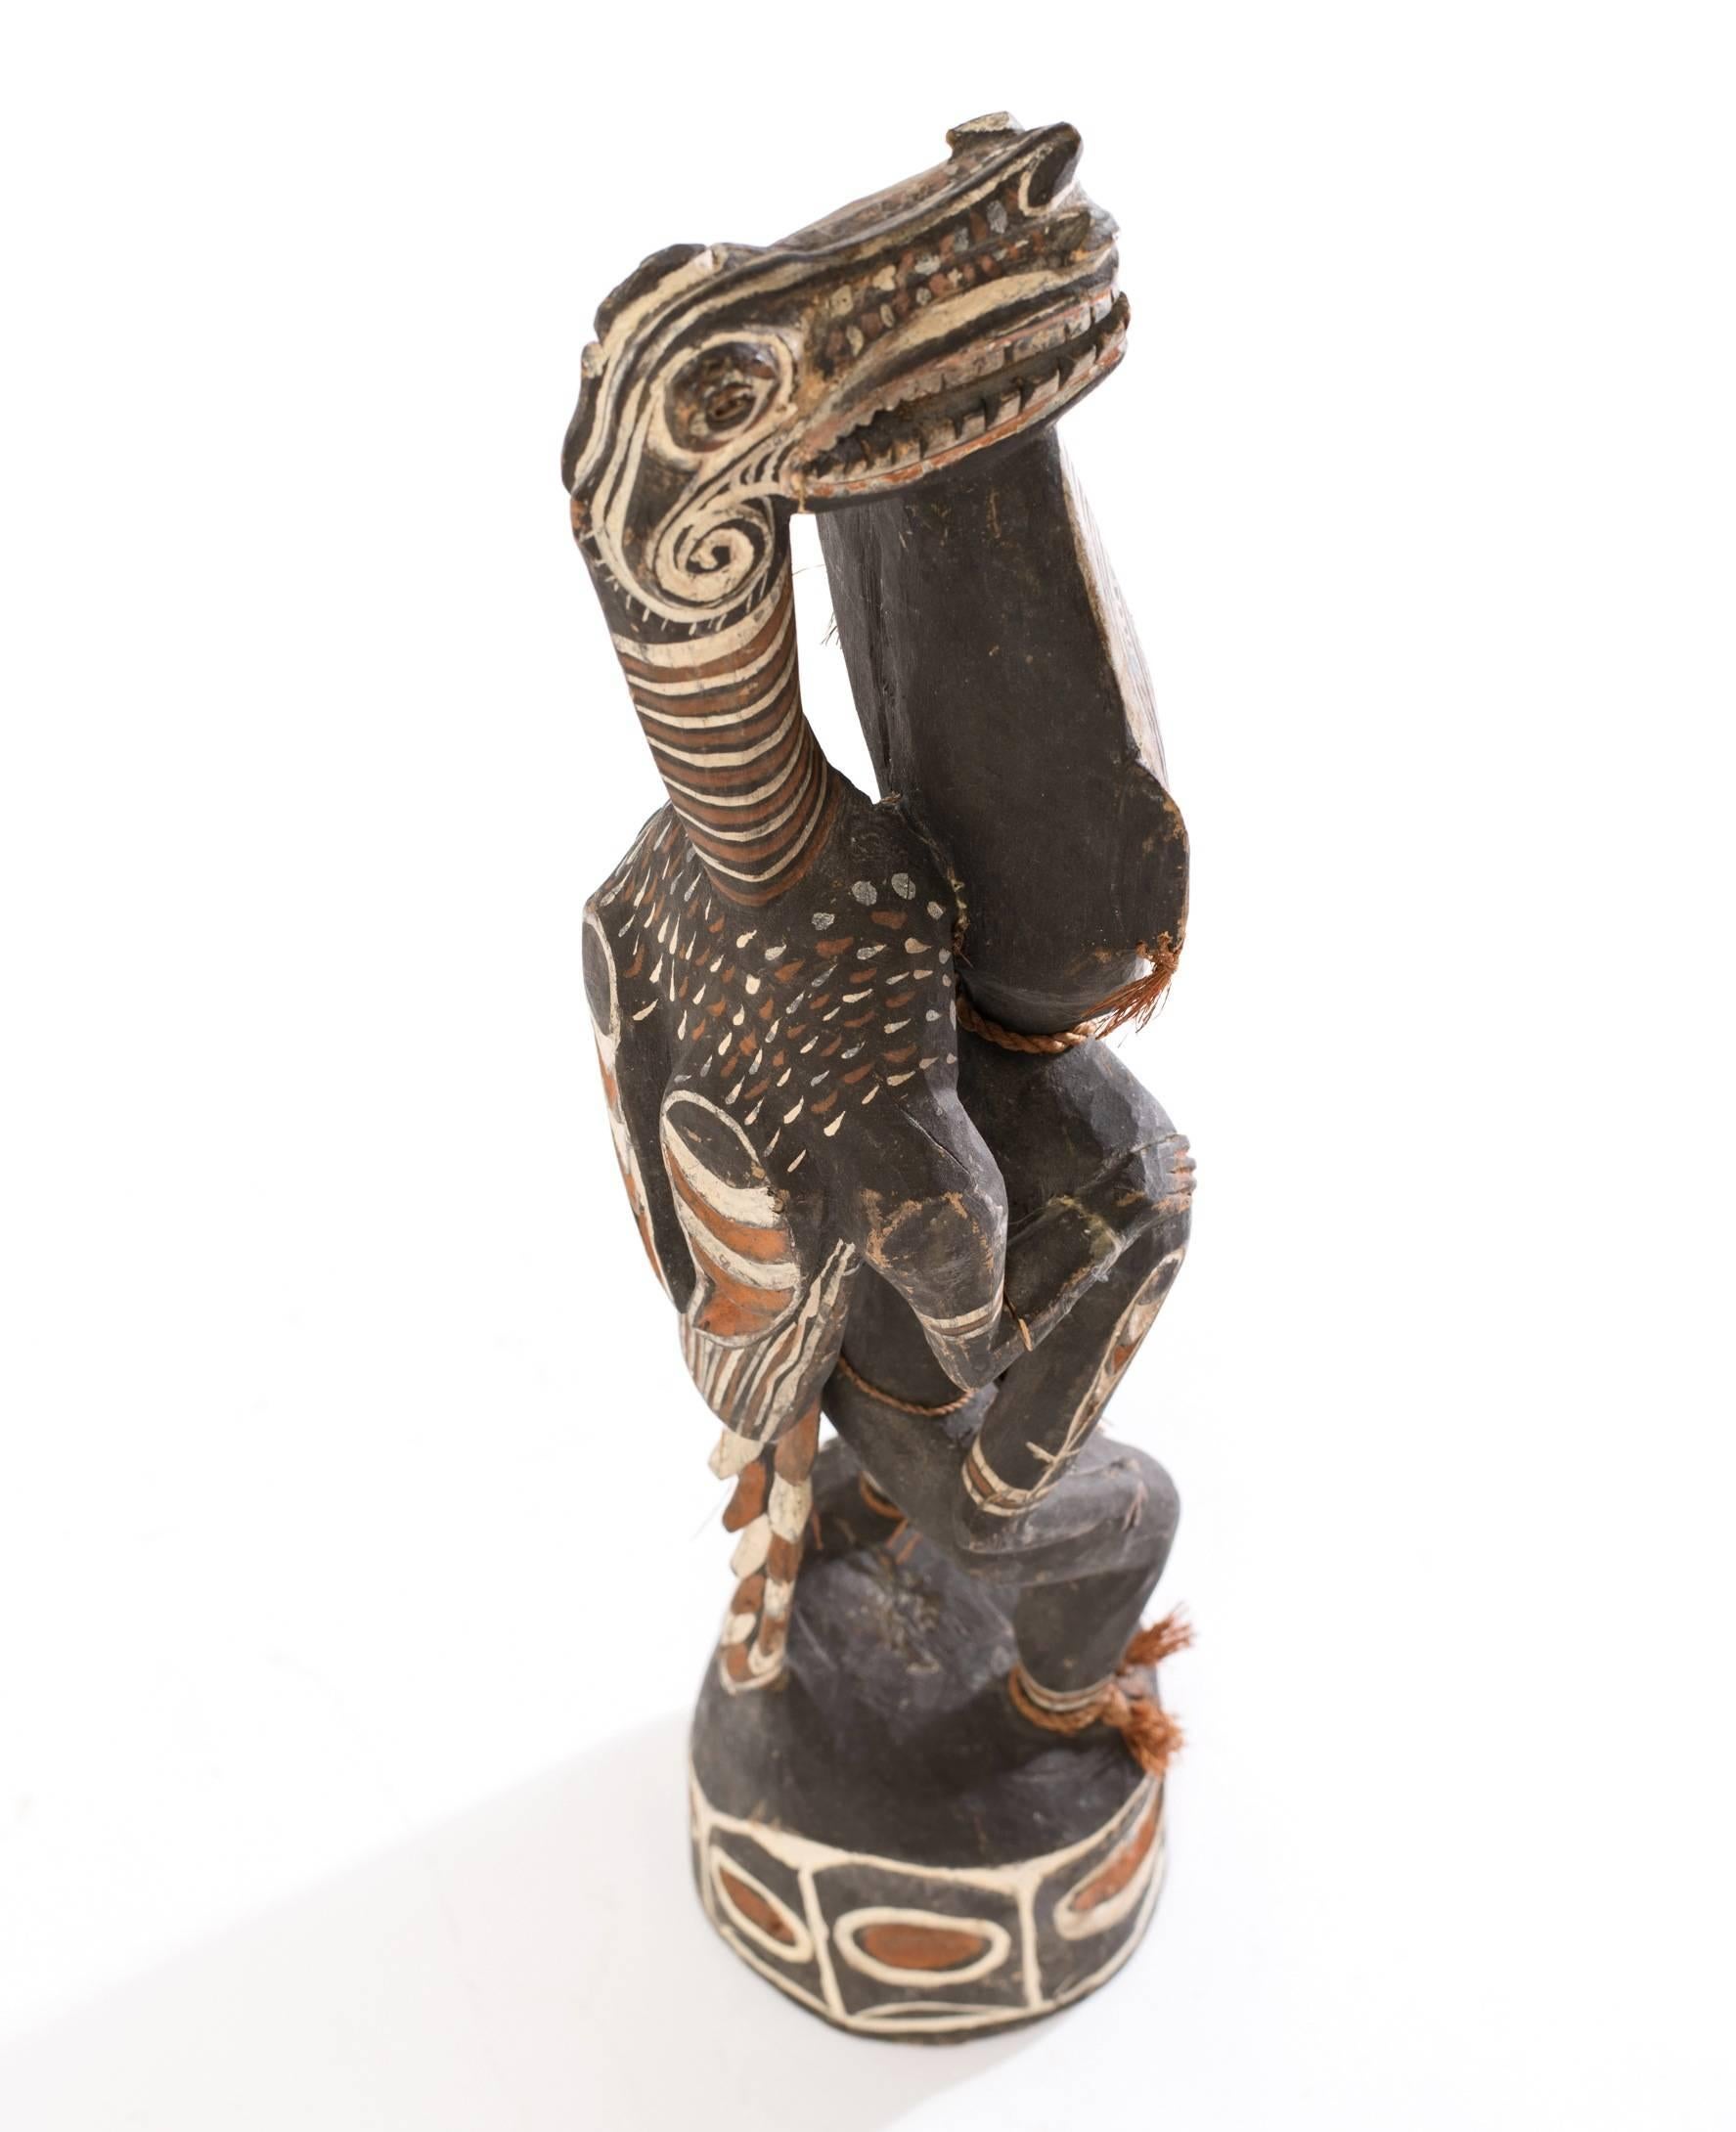 Carved Oceanic Sepik River Gable Figure Sculpture from Papua, New Guinea